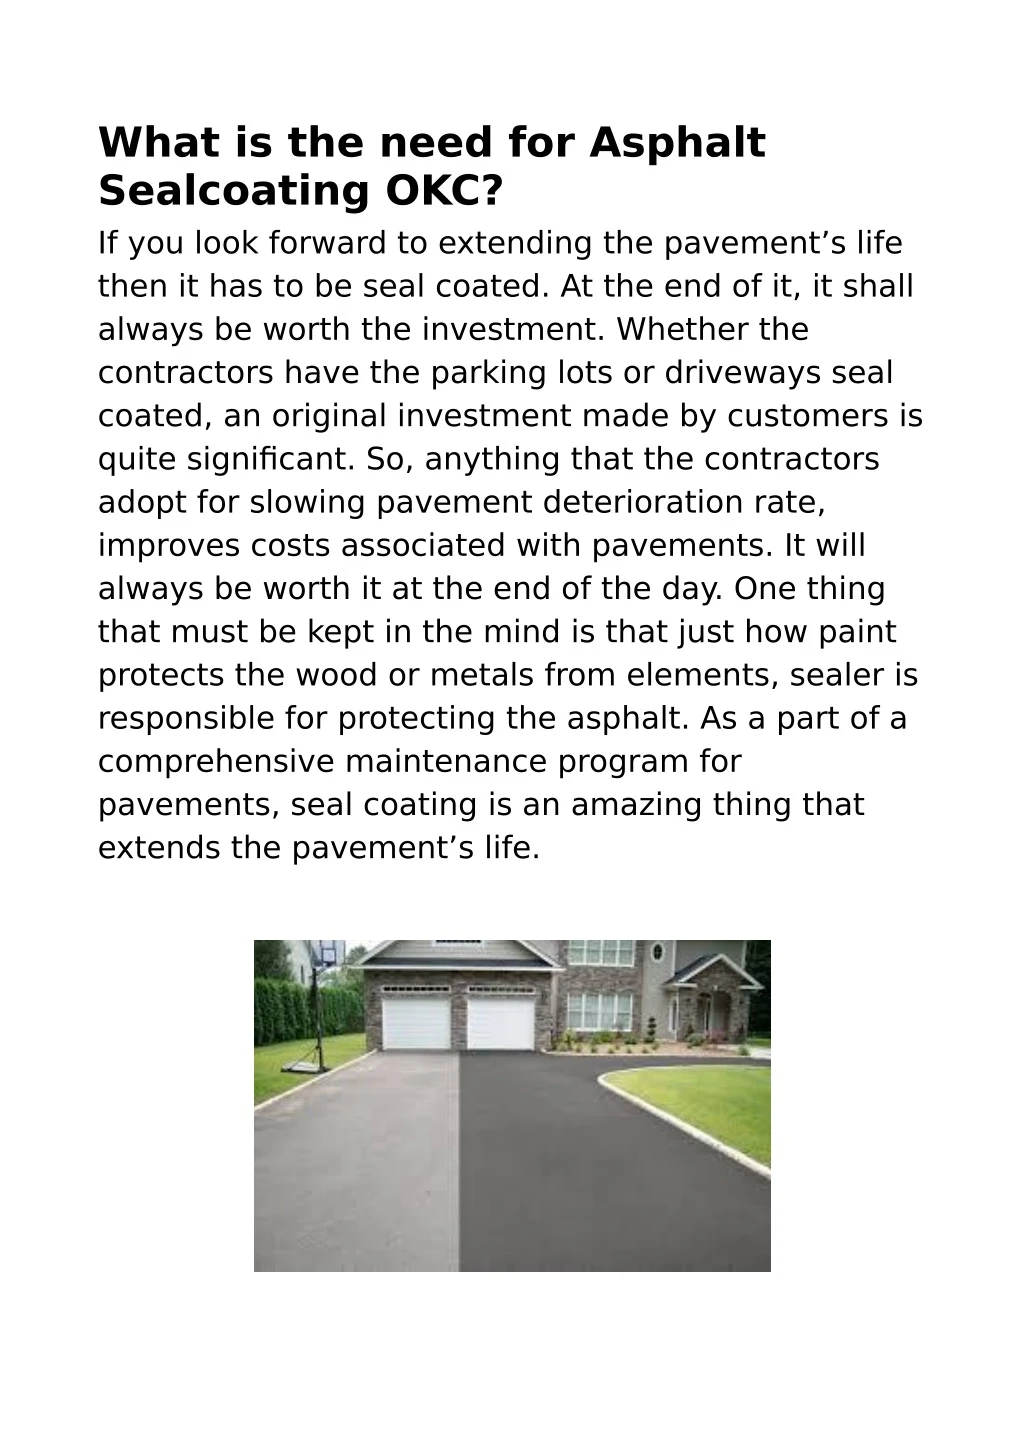 what is the need for asphalt sealcoating